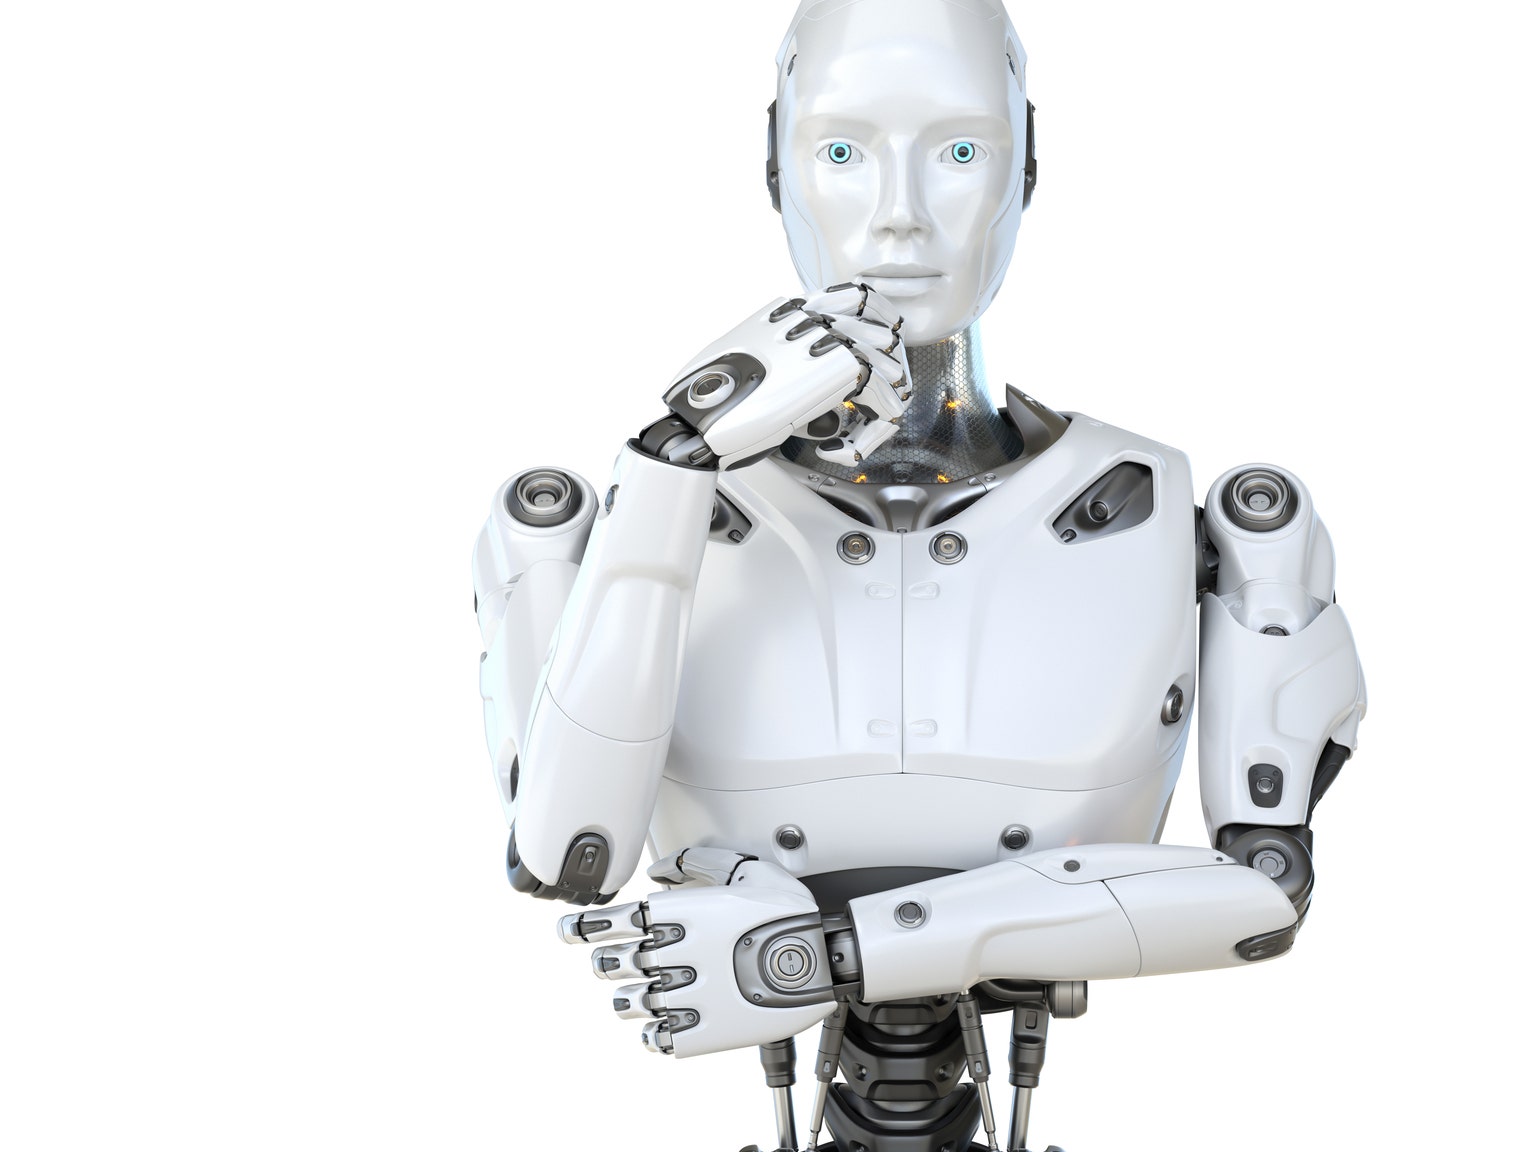 Sony says it has technology to make humanoid still use case: report | Seeking Alpha